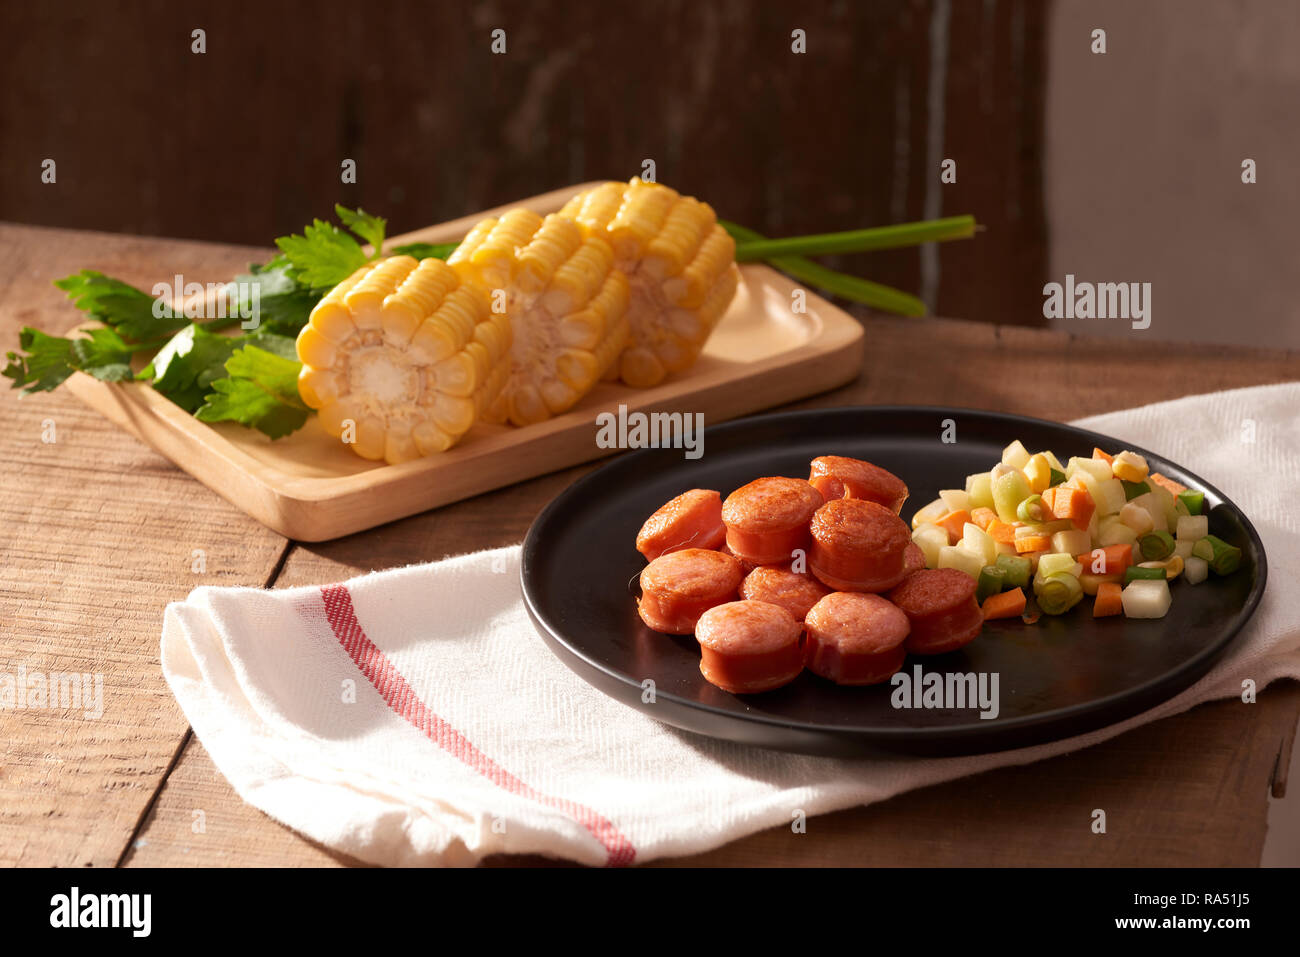 Sliced and fried sausage with salad seen from above close Stock Photo